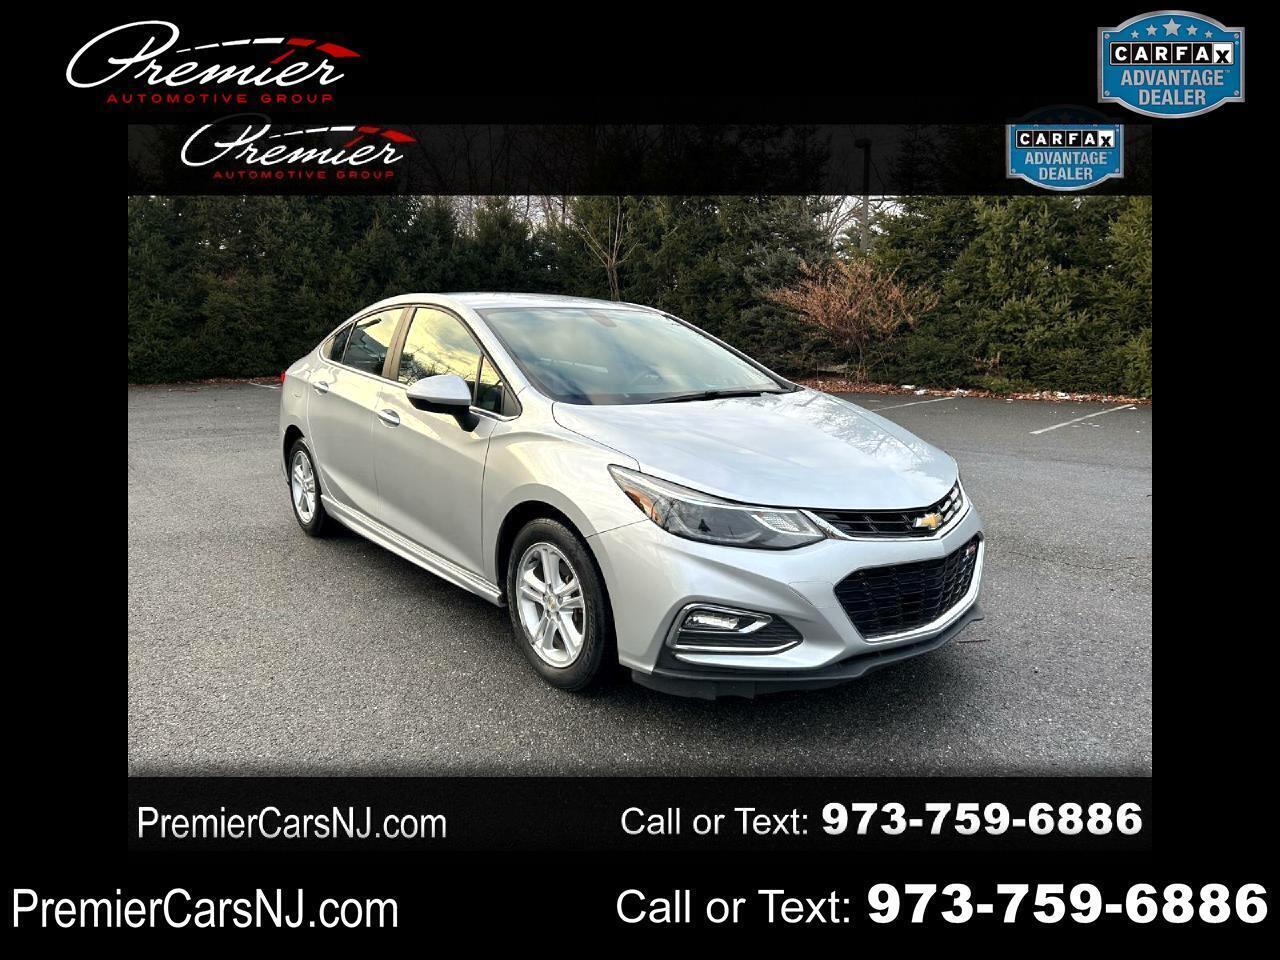 2017 Chevrolet Cruze, Silver with 98584 Miles available now!